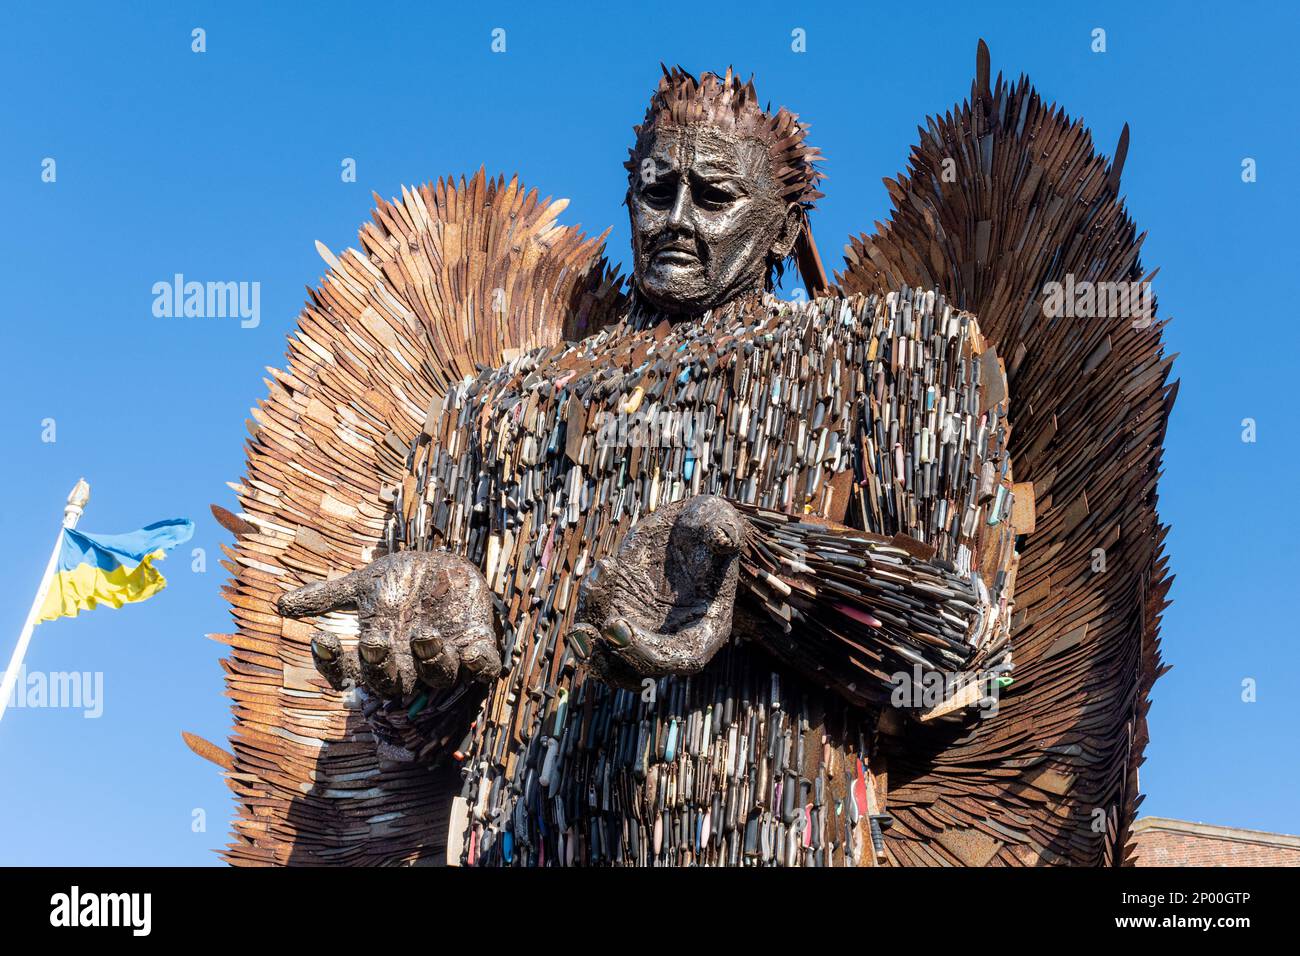 2 March 2023. The Knife Angel sculpture by artist Alfie Bradley is on display in front of Guildford Cathedral, Surrey, England, UK, for the month. It is known as the national monument against violence and aggression. The sculpture was made from thousands of blunted knives handed in during a knife amnesty throughout the country in agreement with the 43 police constabularies. It was the idea of Clive Knowles, chairman of the British Ironwork Centre in Shropshire. Stock Photo